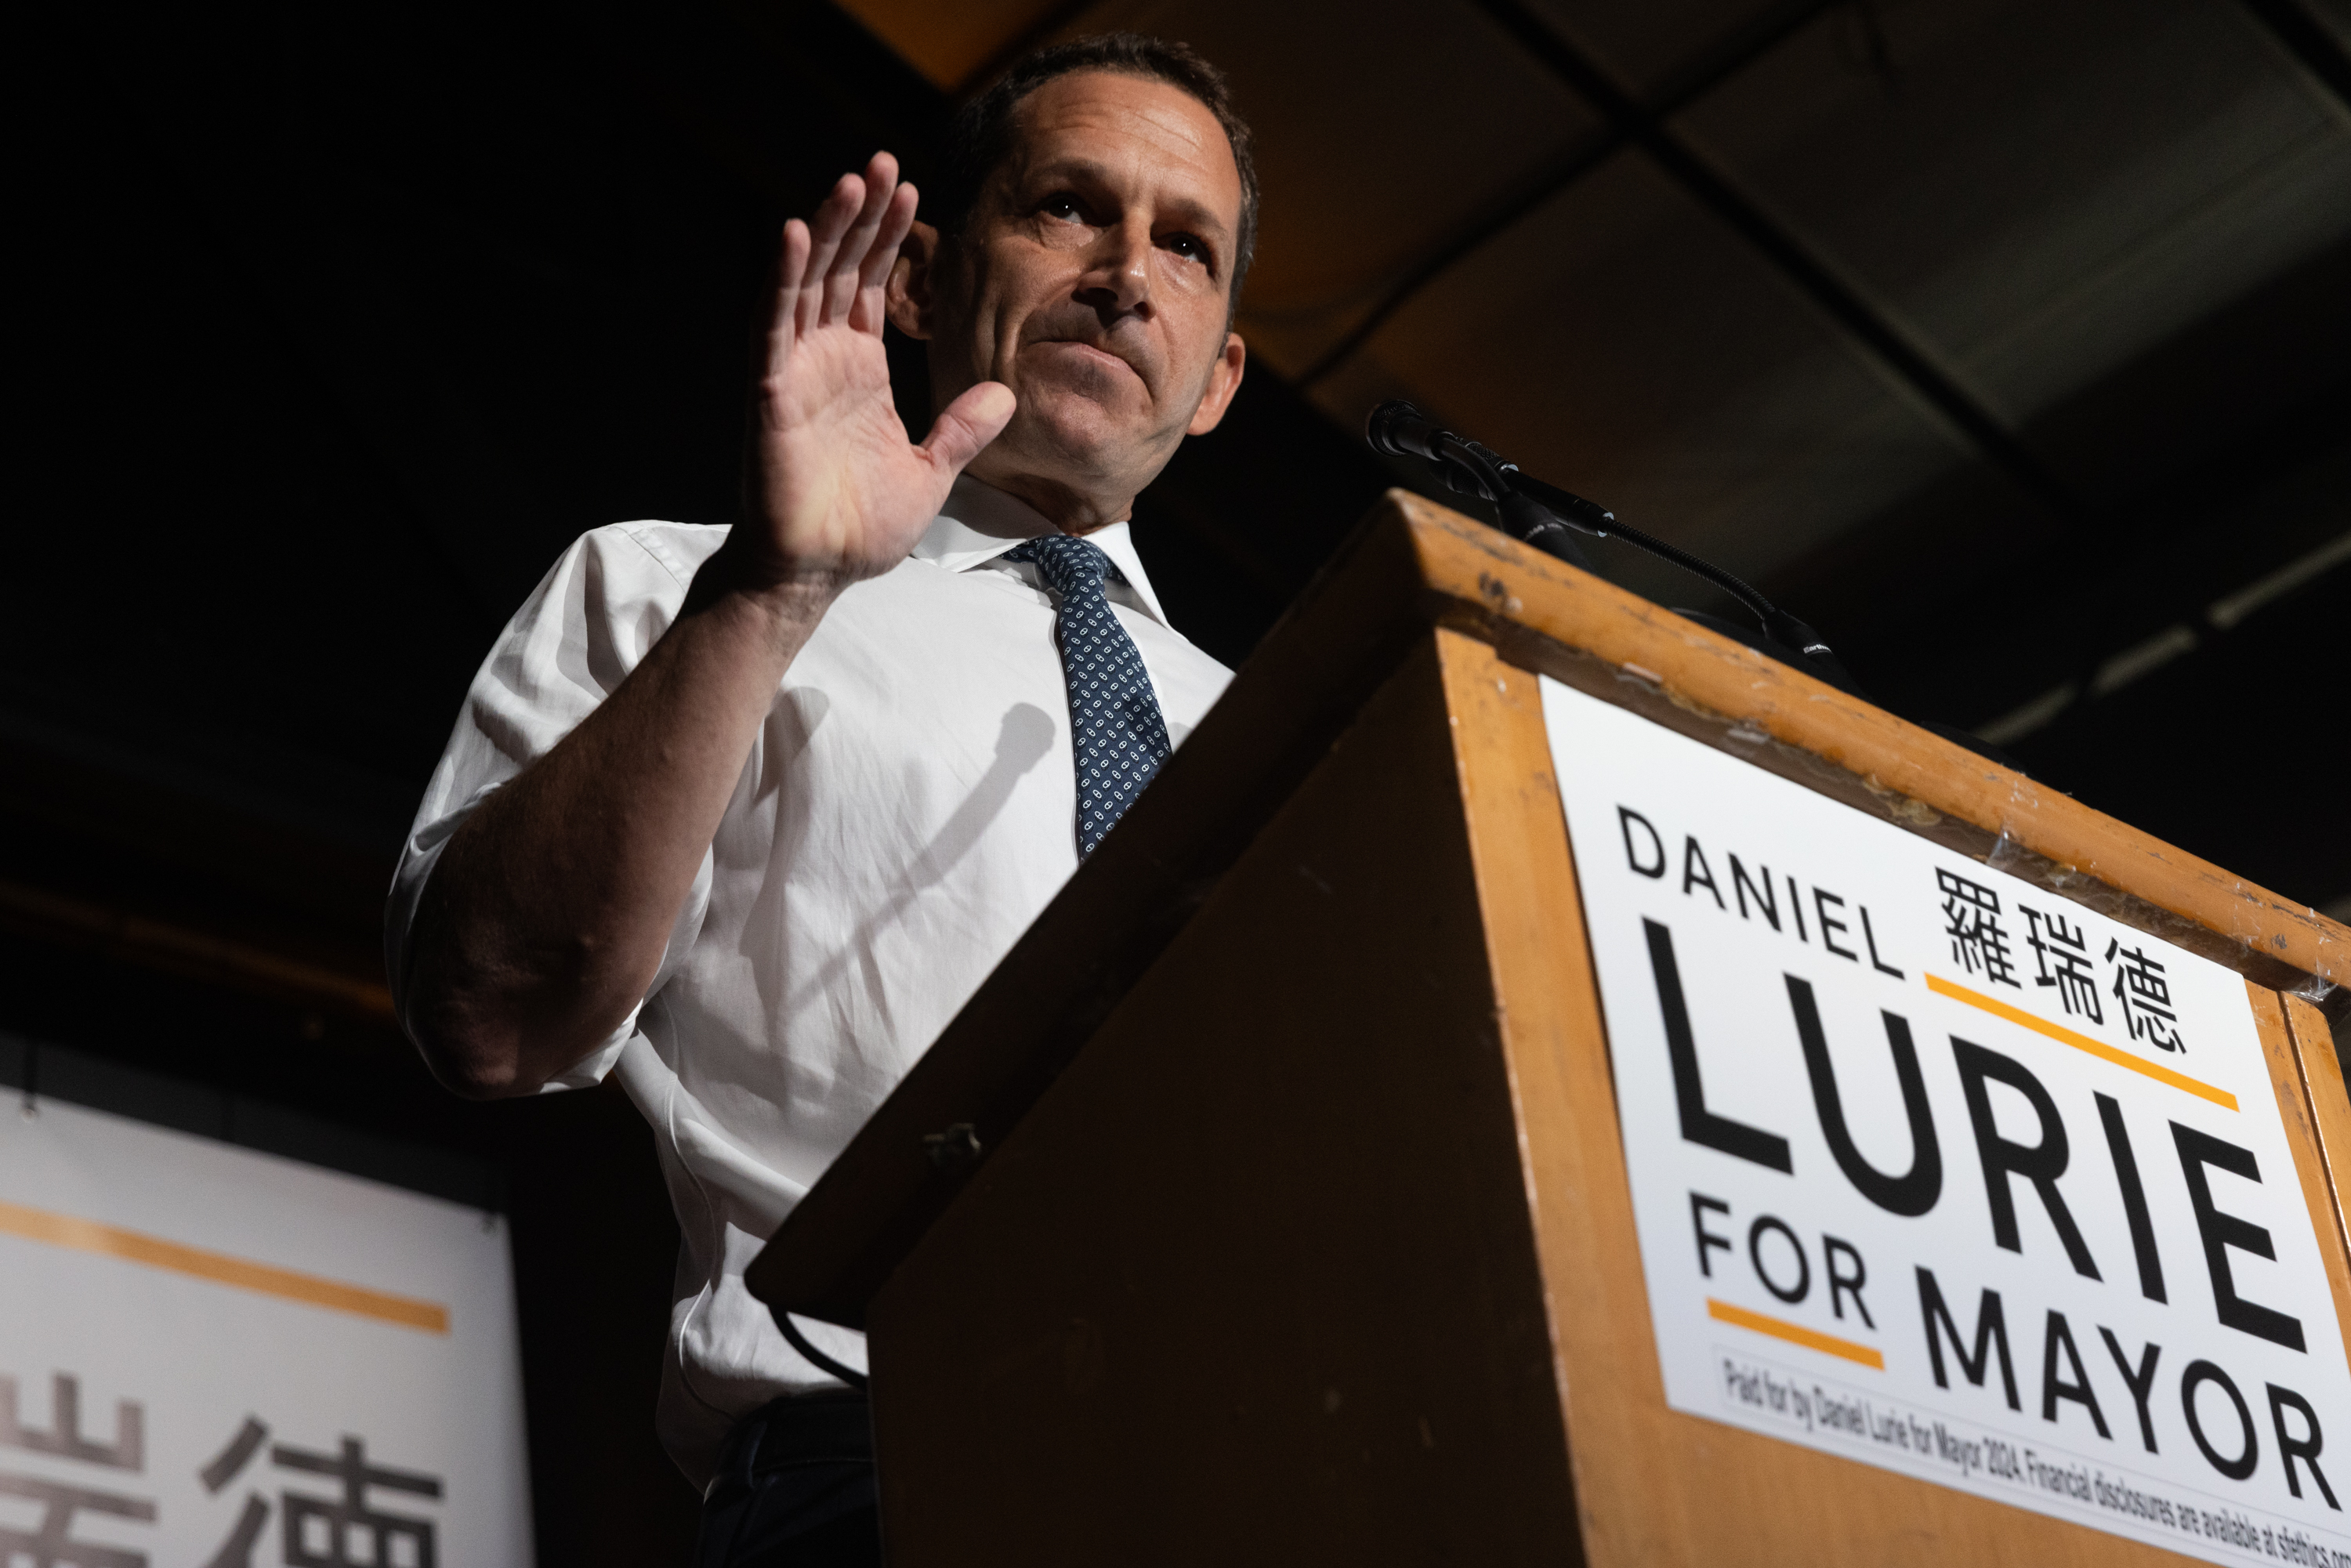 A man gestures while speaking at a podium with a "Lurie for Mayor" sign.